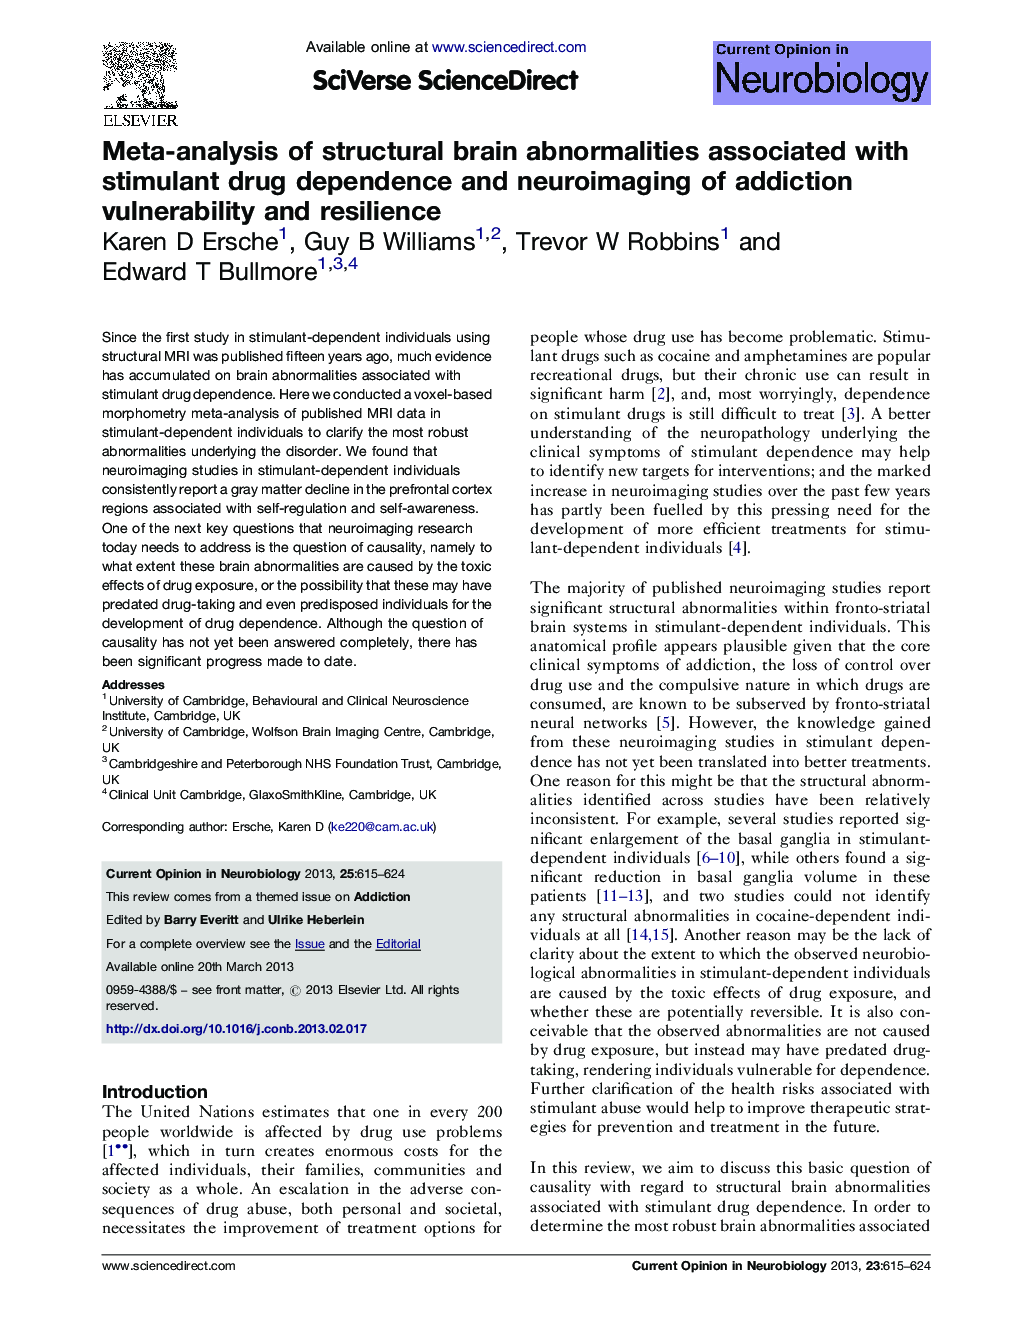 Meta-analysis of structural brain abnormalities associated with stimulant drug dependence and neuroimaging of addiction vulnerability and resilience